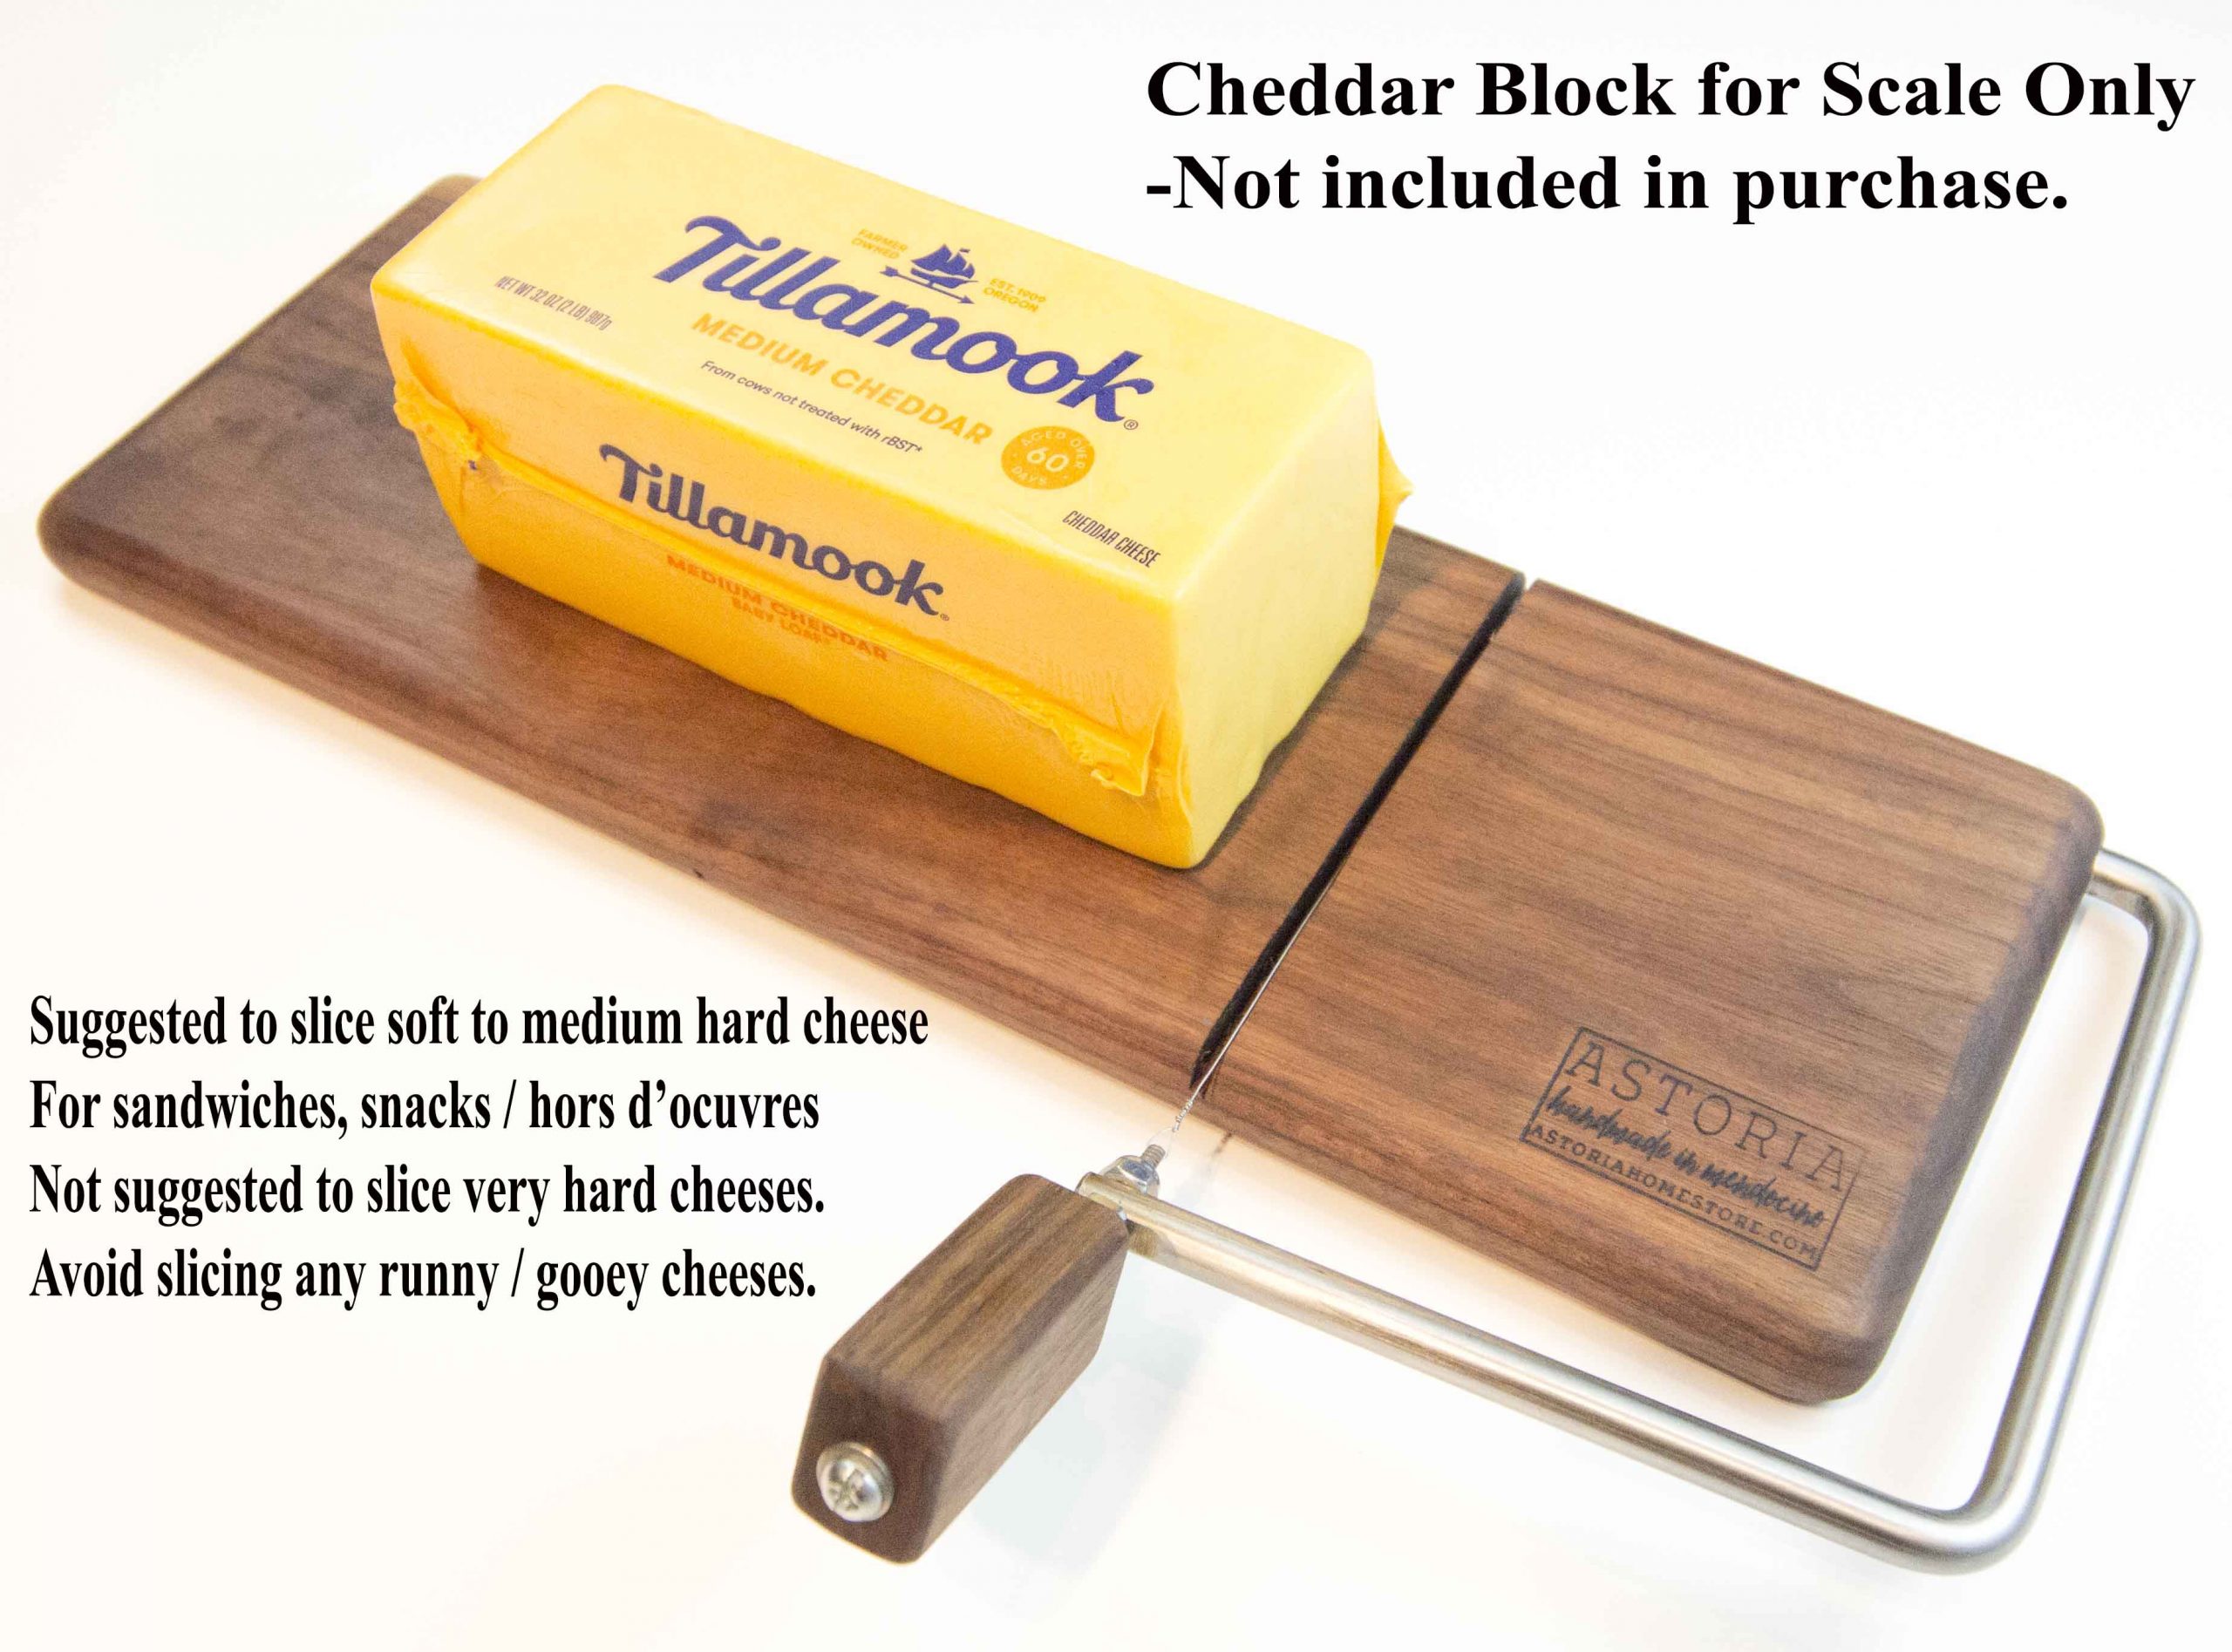 https://www.astoriahomestore.com/wp-content/uploads/2021/10/Cheese-Slicer-With-Large-Block-of-Cheese-Handmade-in-Mendocino-Village-Handcrafted-Cheese-Slicer-Large-Black-Walnut-Cheese-Slicer-1-copy-scaled.jpg